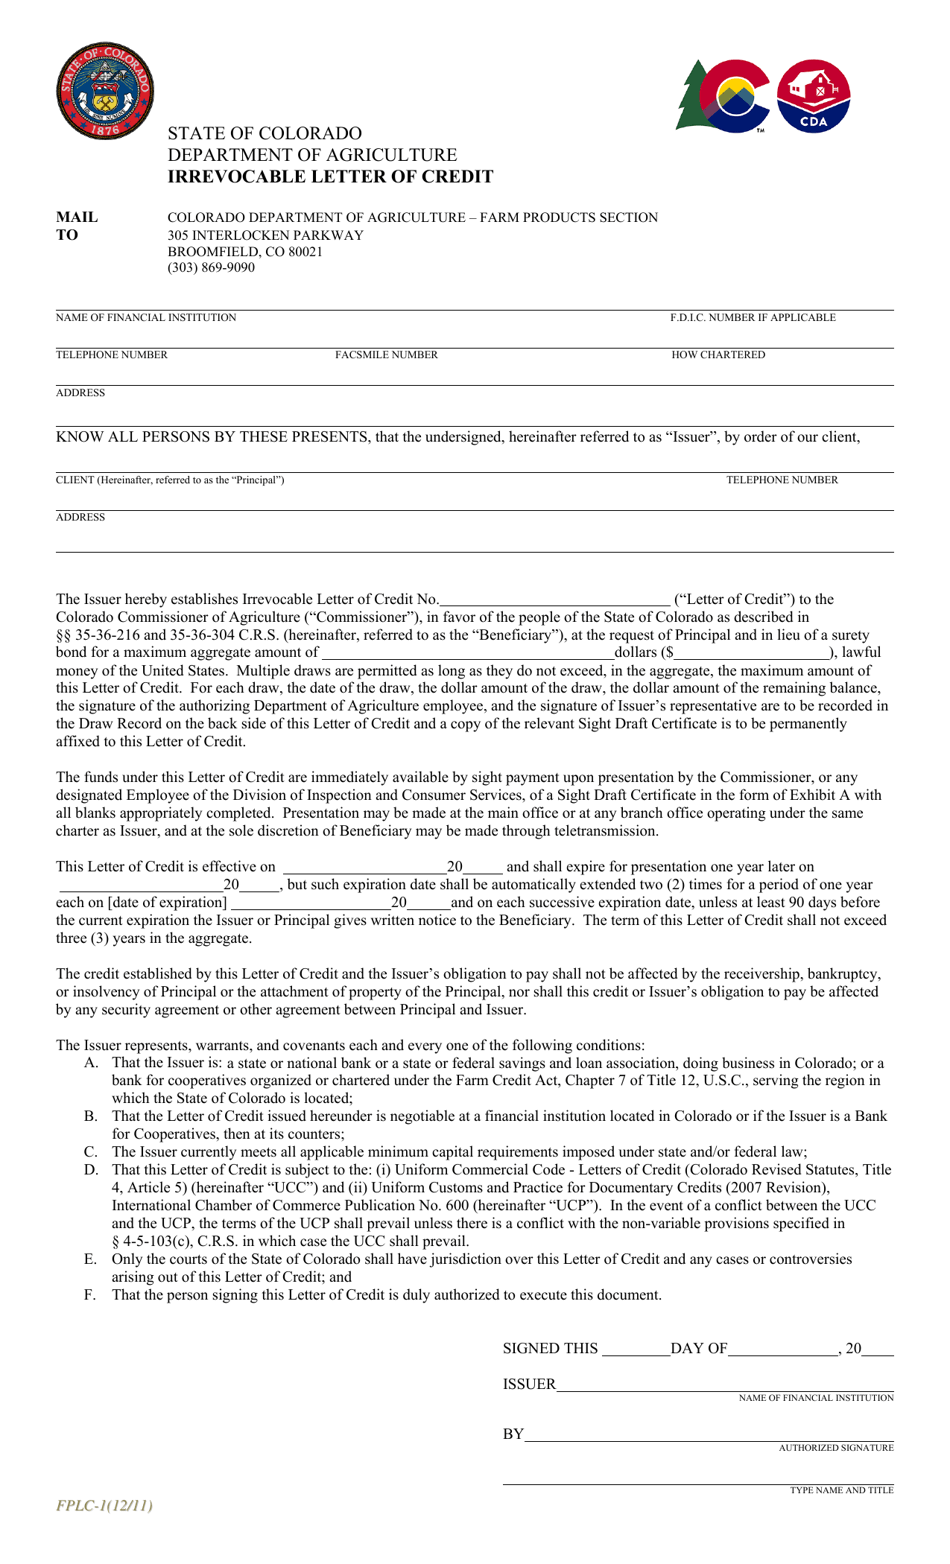 Form FPLC-1 Irrevocable Letter of Credit - Colorado, Page 1